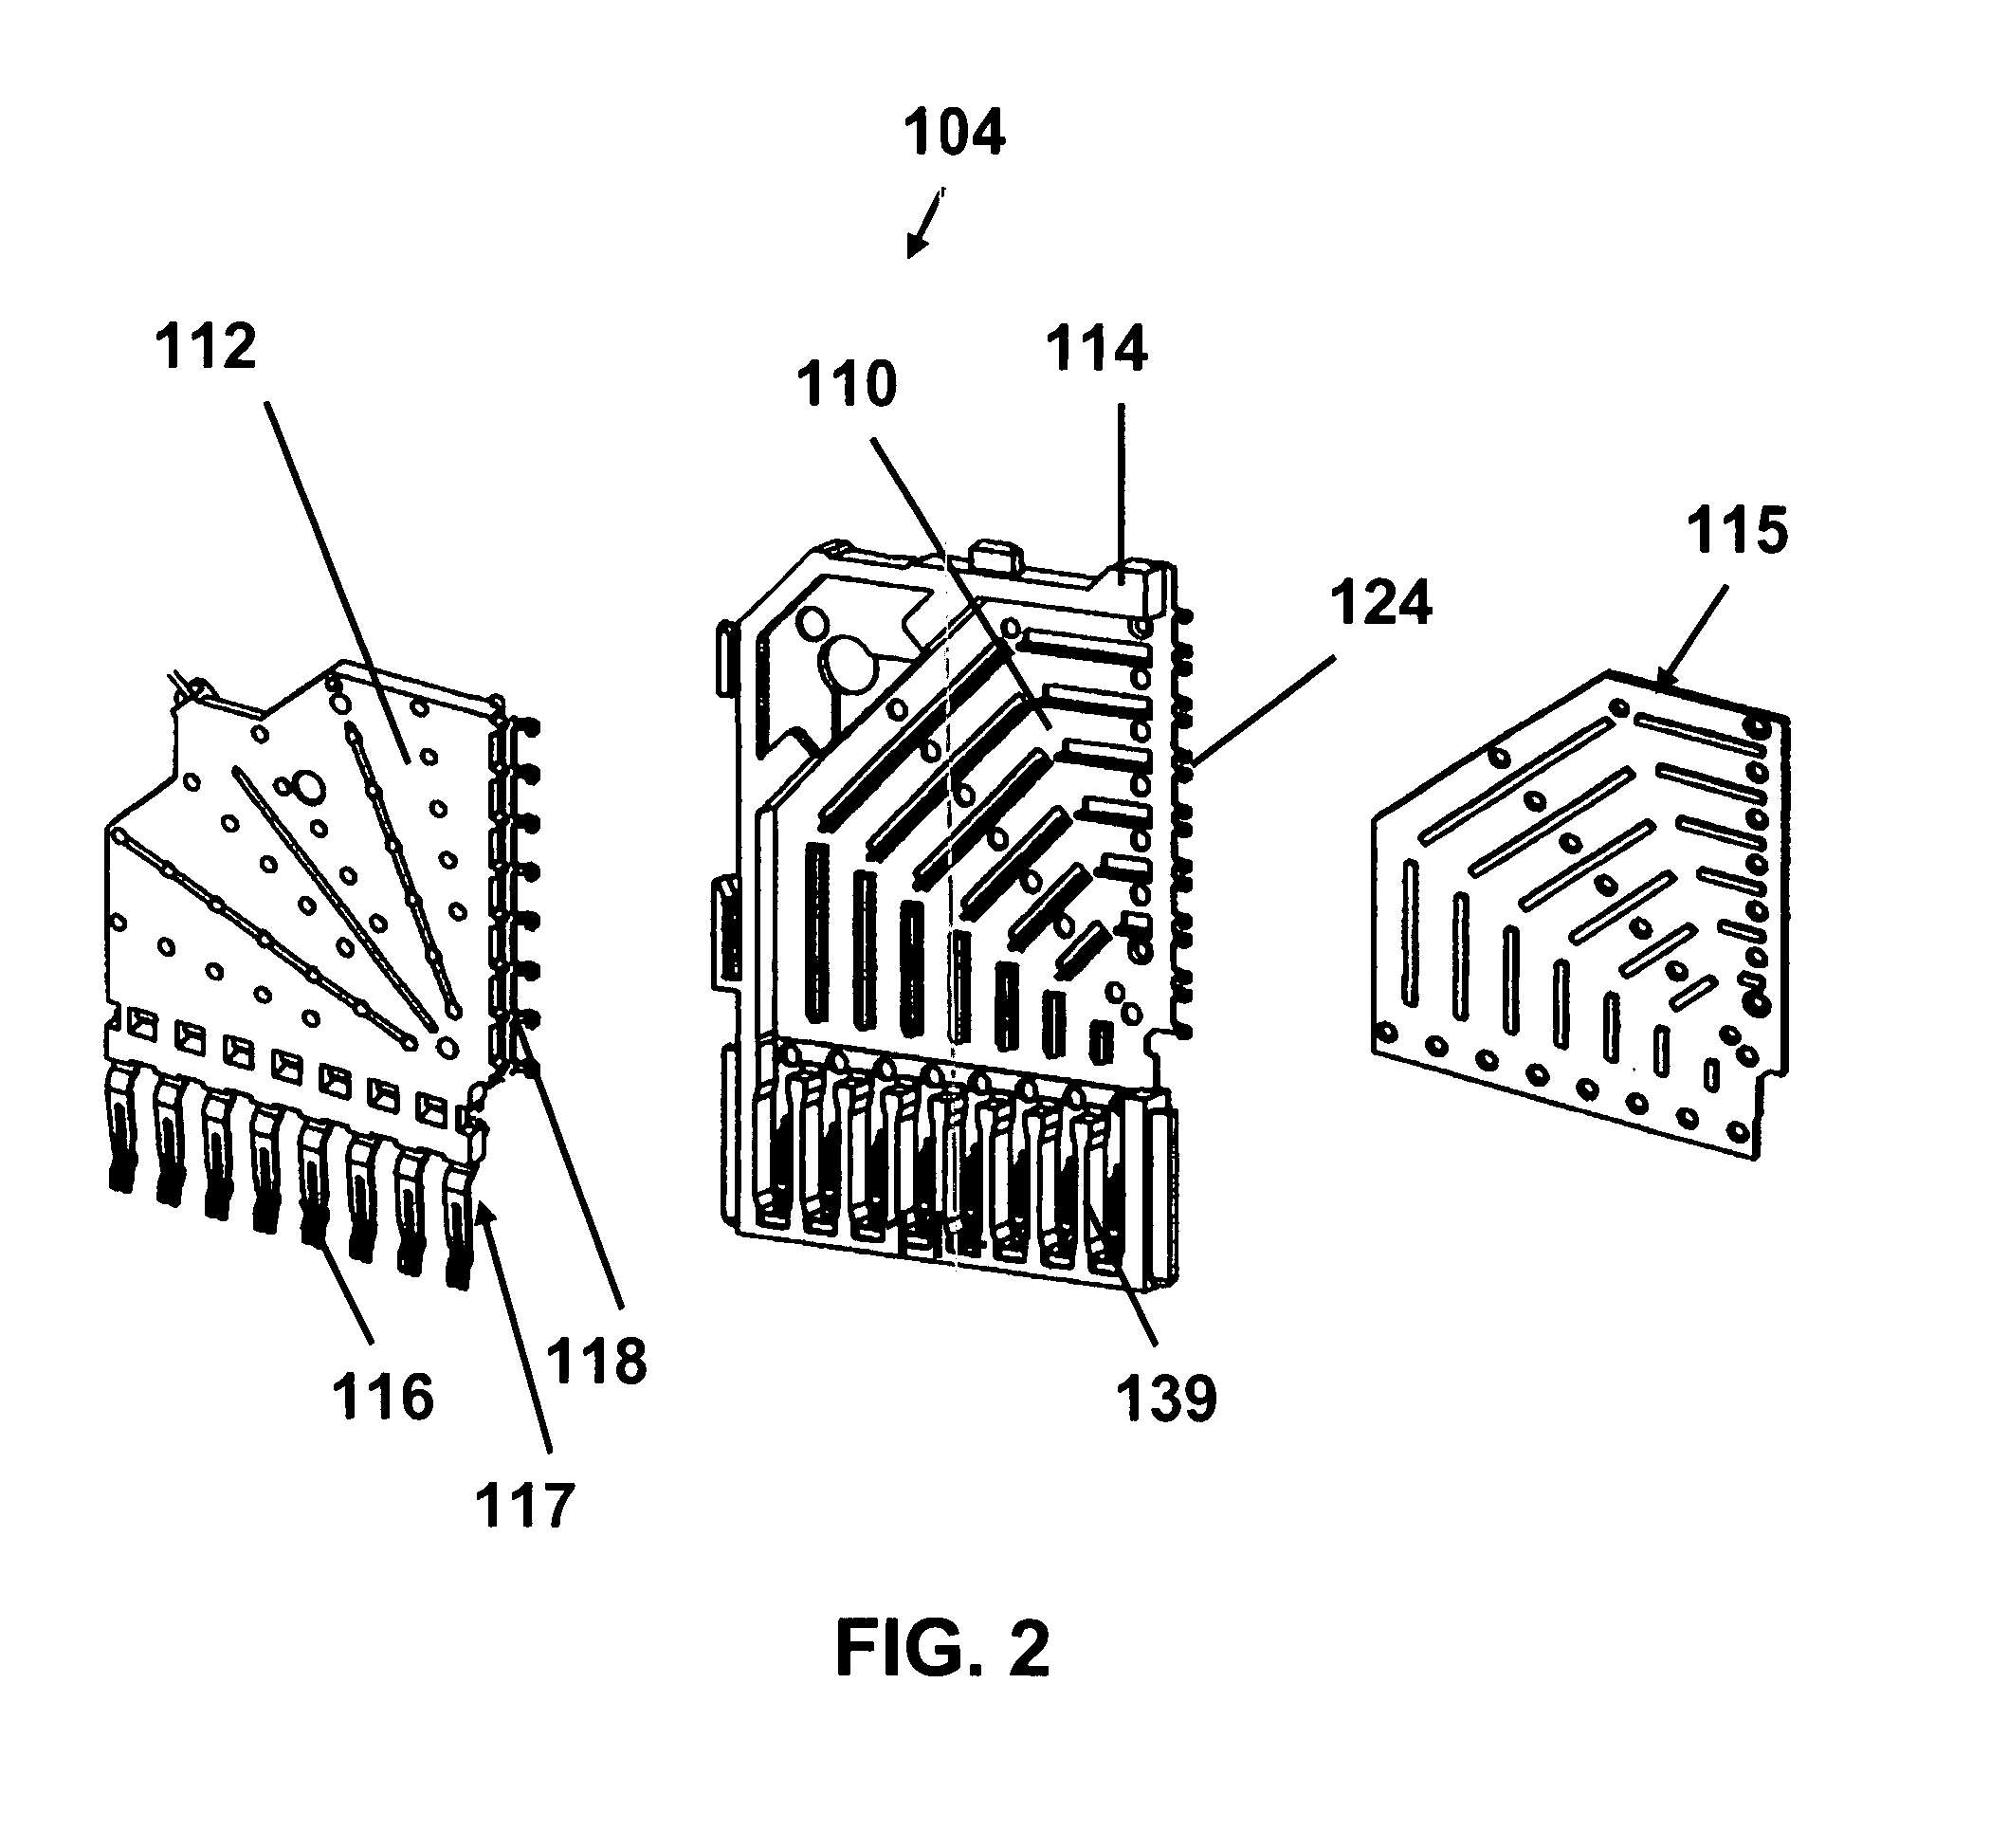 Electrical connector with divider shields to minimize crosstalk